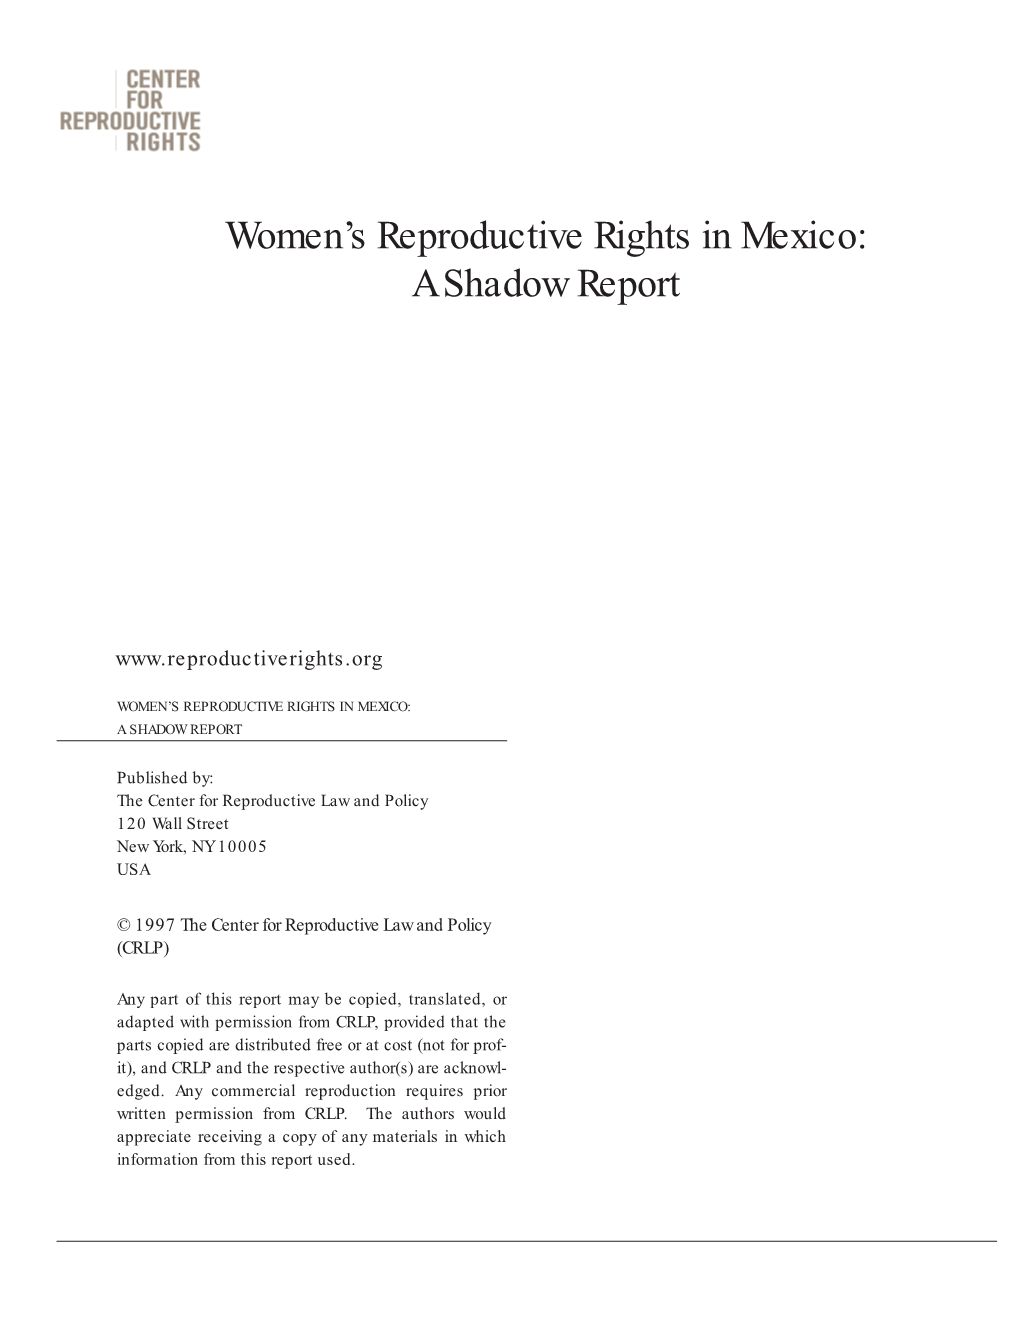 Women's Reproductive Rights in Mexico